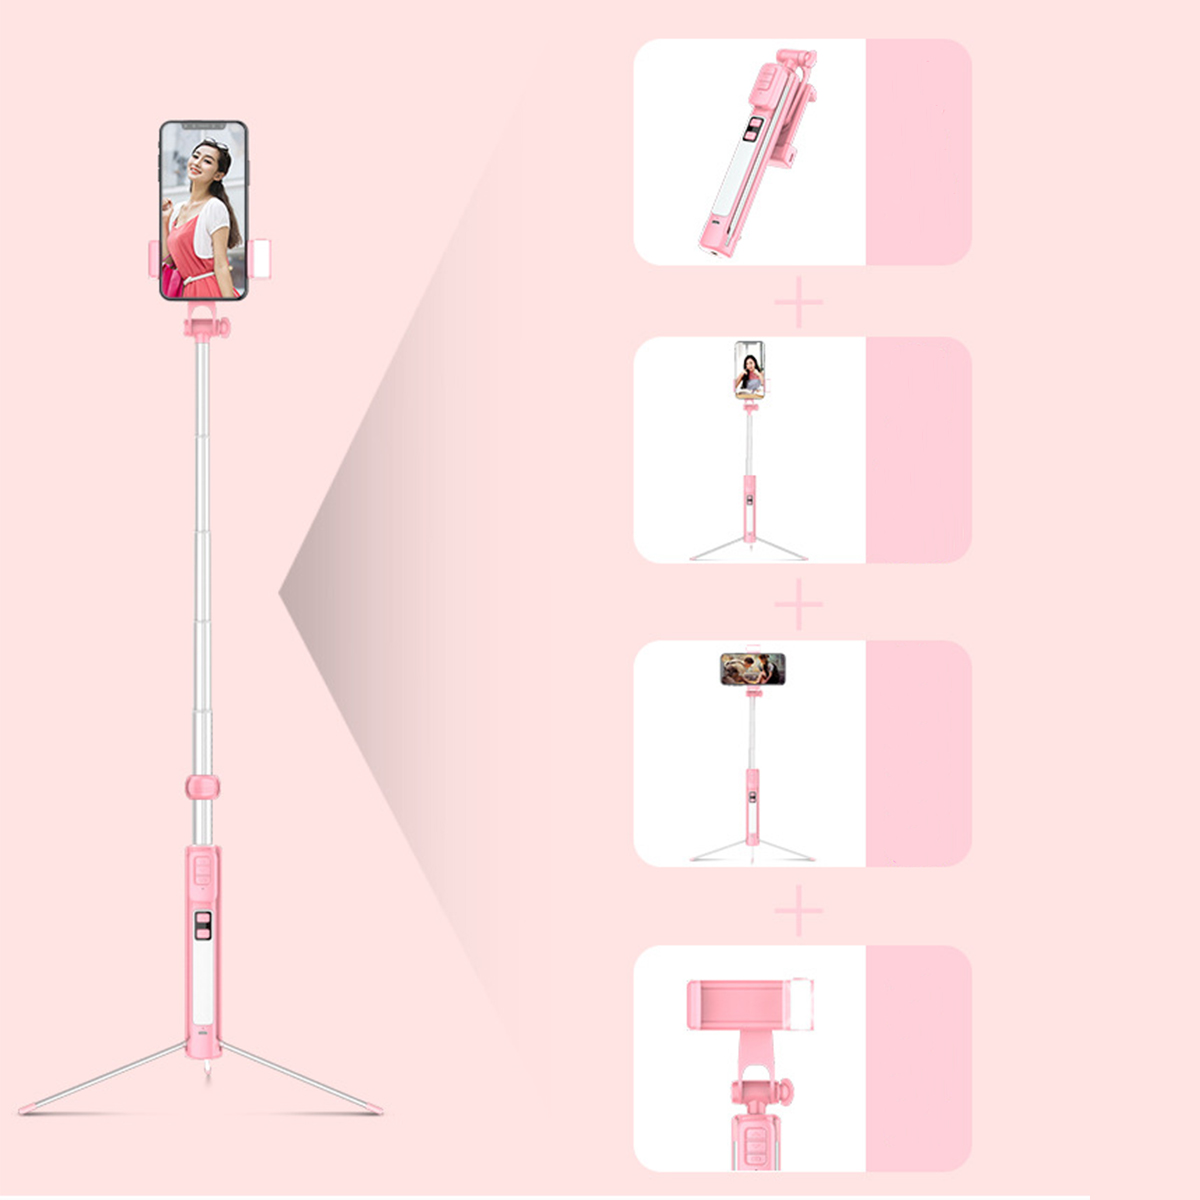 Mini-bluetooth-Hand-held-Selfie-Stick-Remote-Control-Multi-angle-Tripod-With-LED-Fill-Light-for-Live-1538122-8